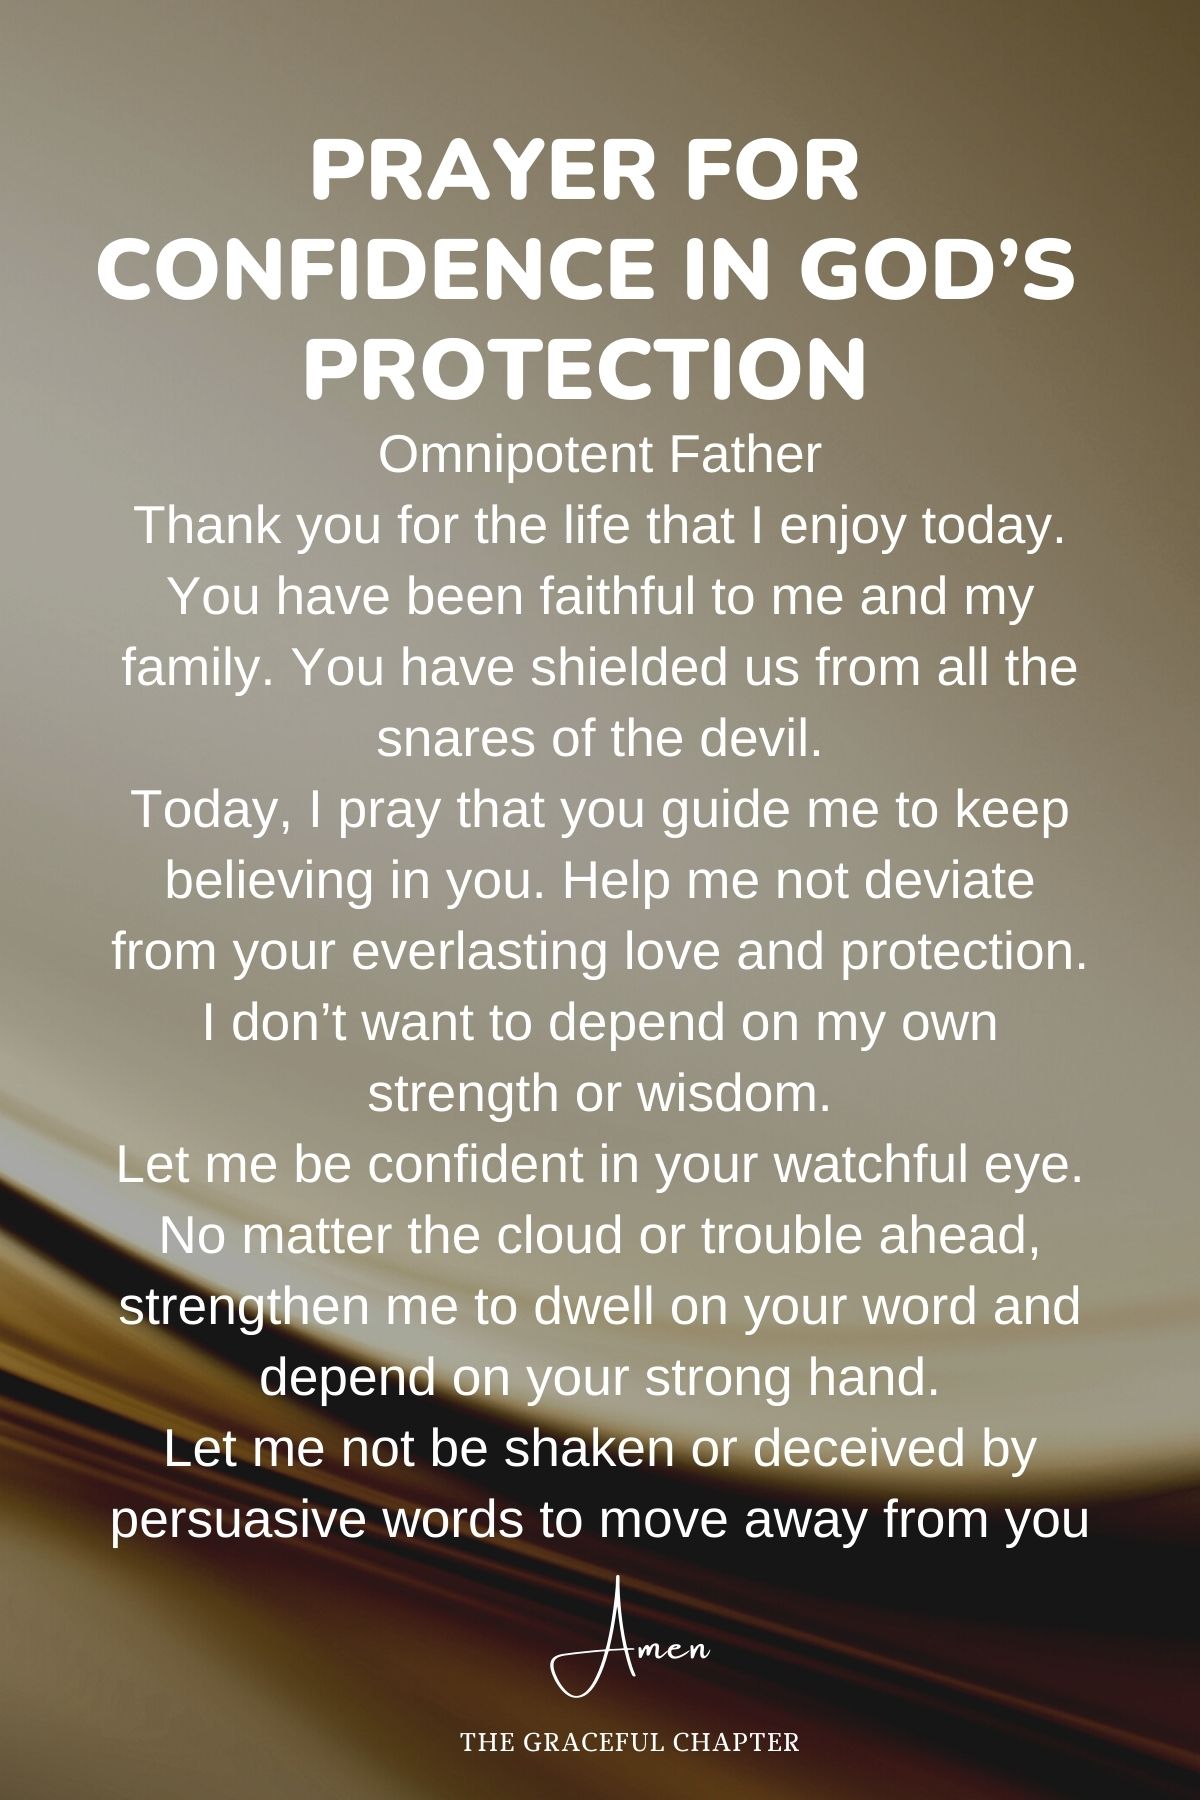 Prayer for confidence in God’s protection